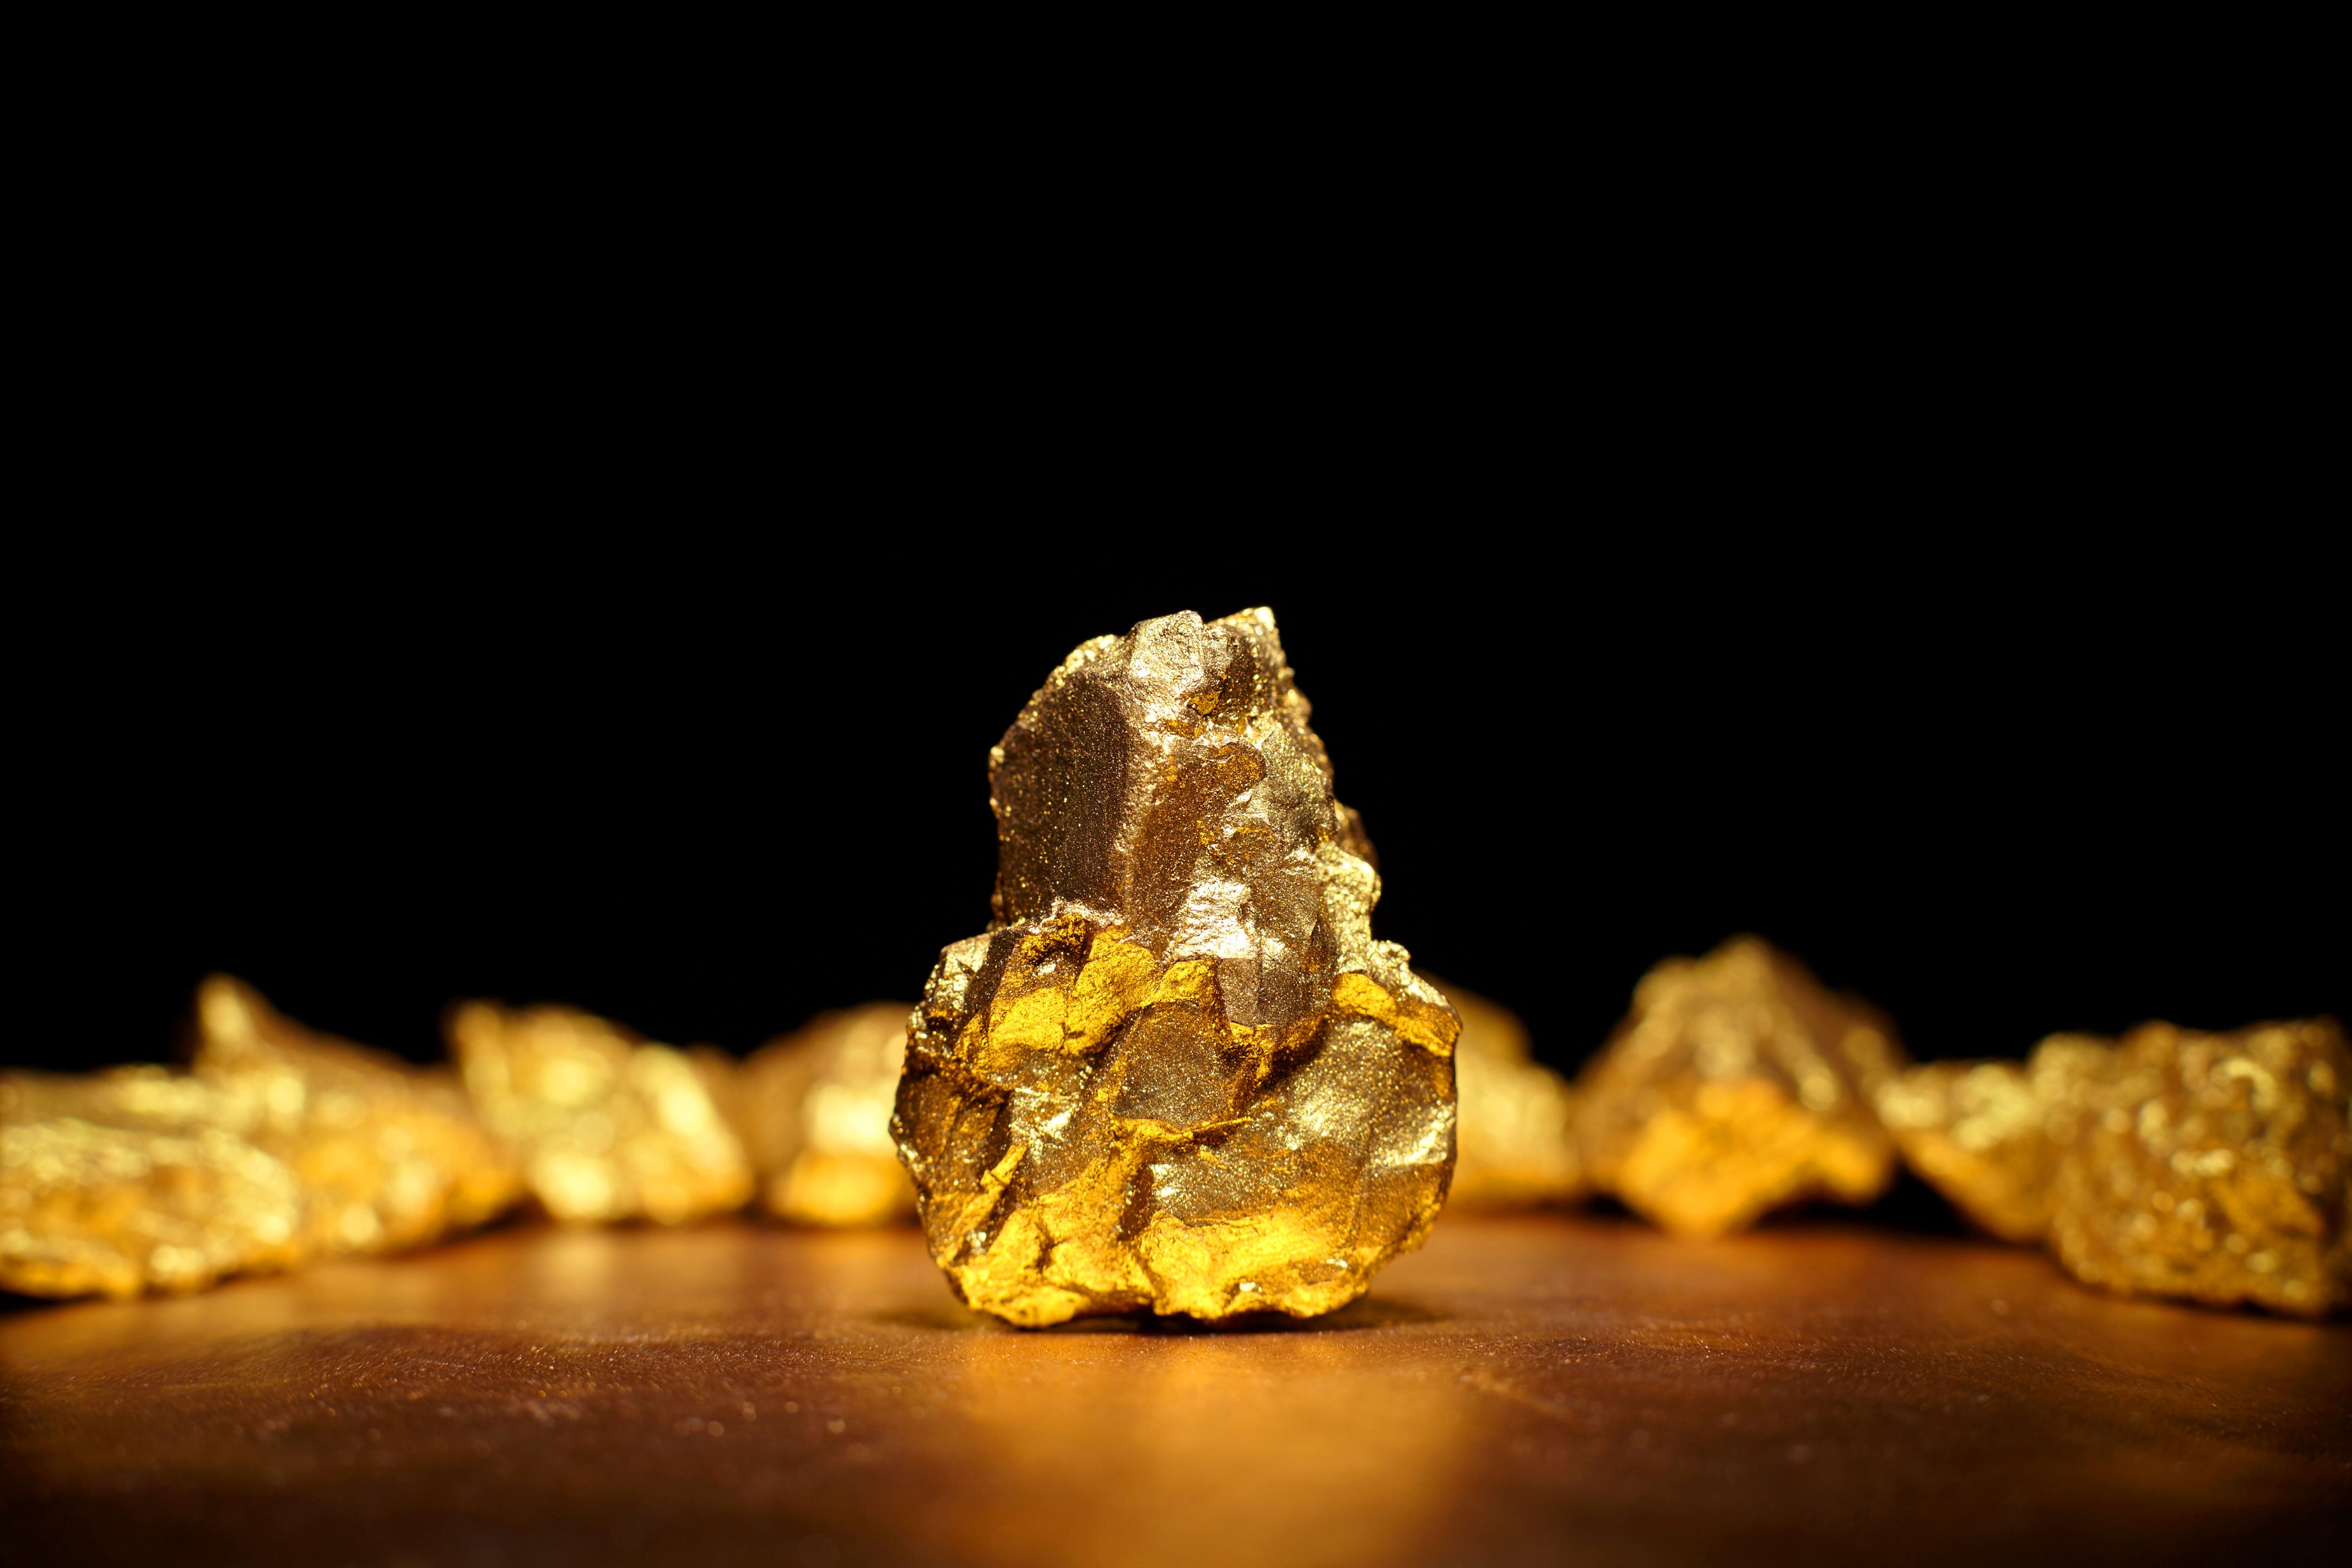 Nugget of gold shining brightly with other nuggets in background